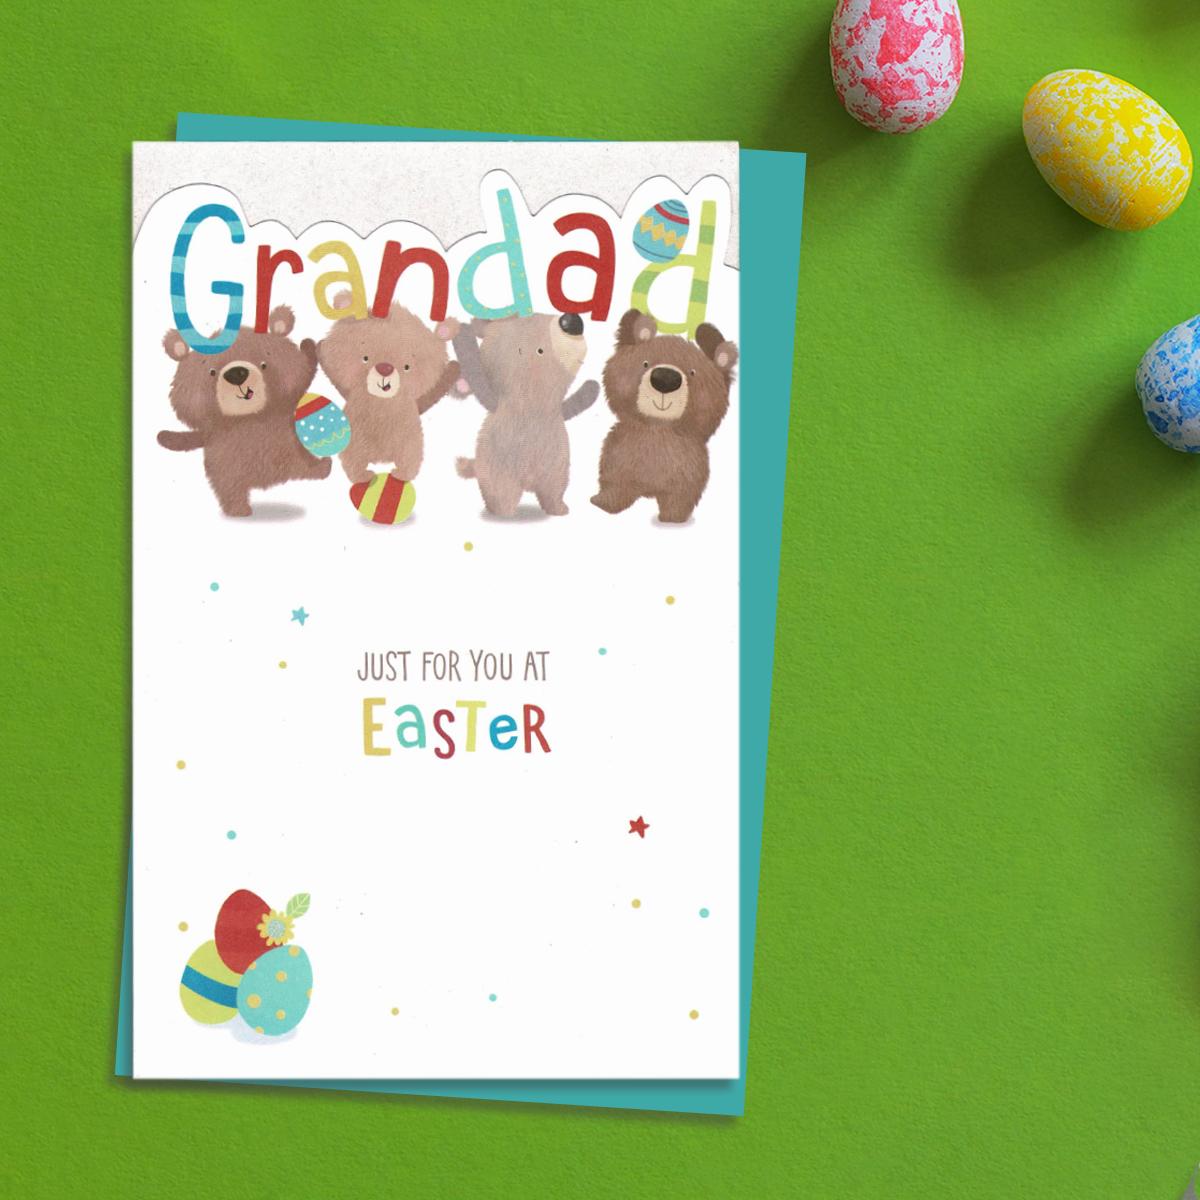 ' Grandad Just For You At Easter' Card Featuring Four Bears With Easter Eggs! Complete With Bright Teal Envelope